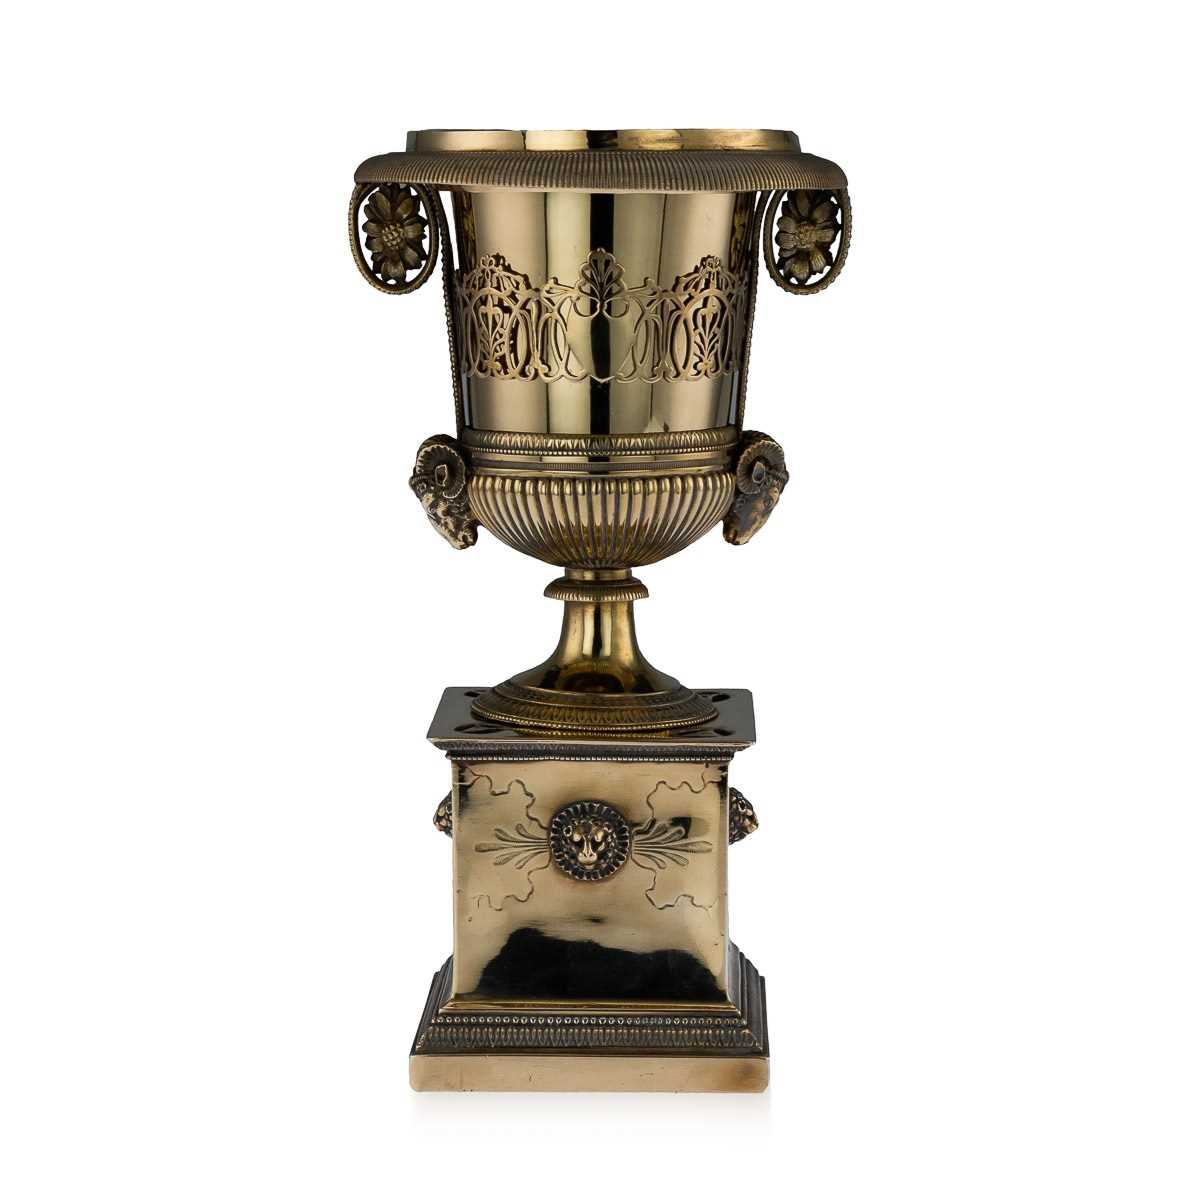 AN EARLY 19TH CENTURY SILVER GILT URN BY MARC JACQUART, PARIS